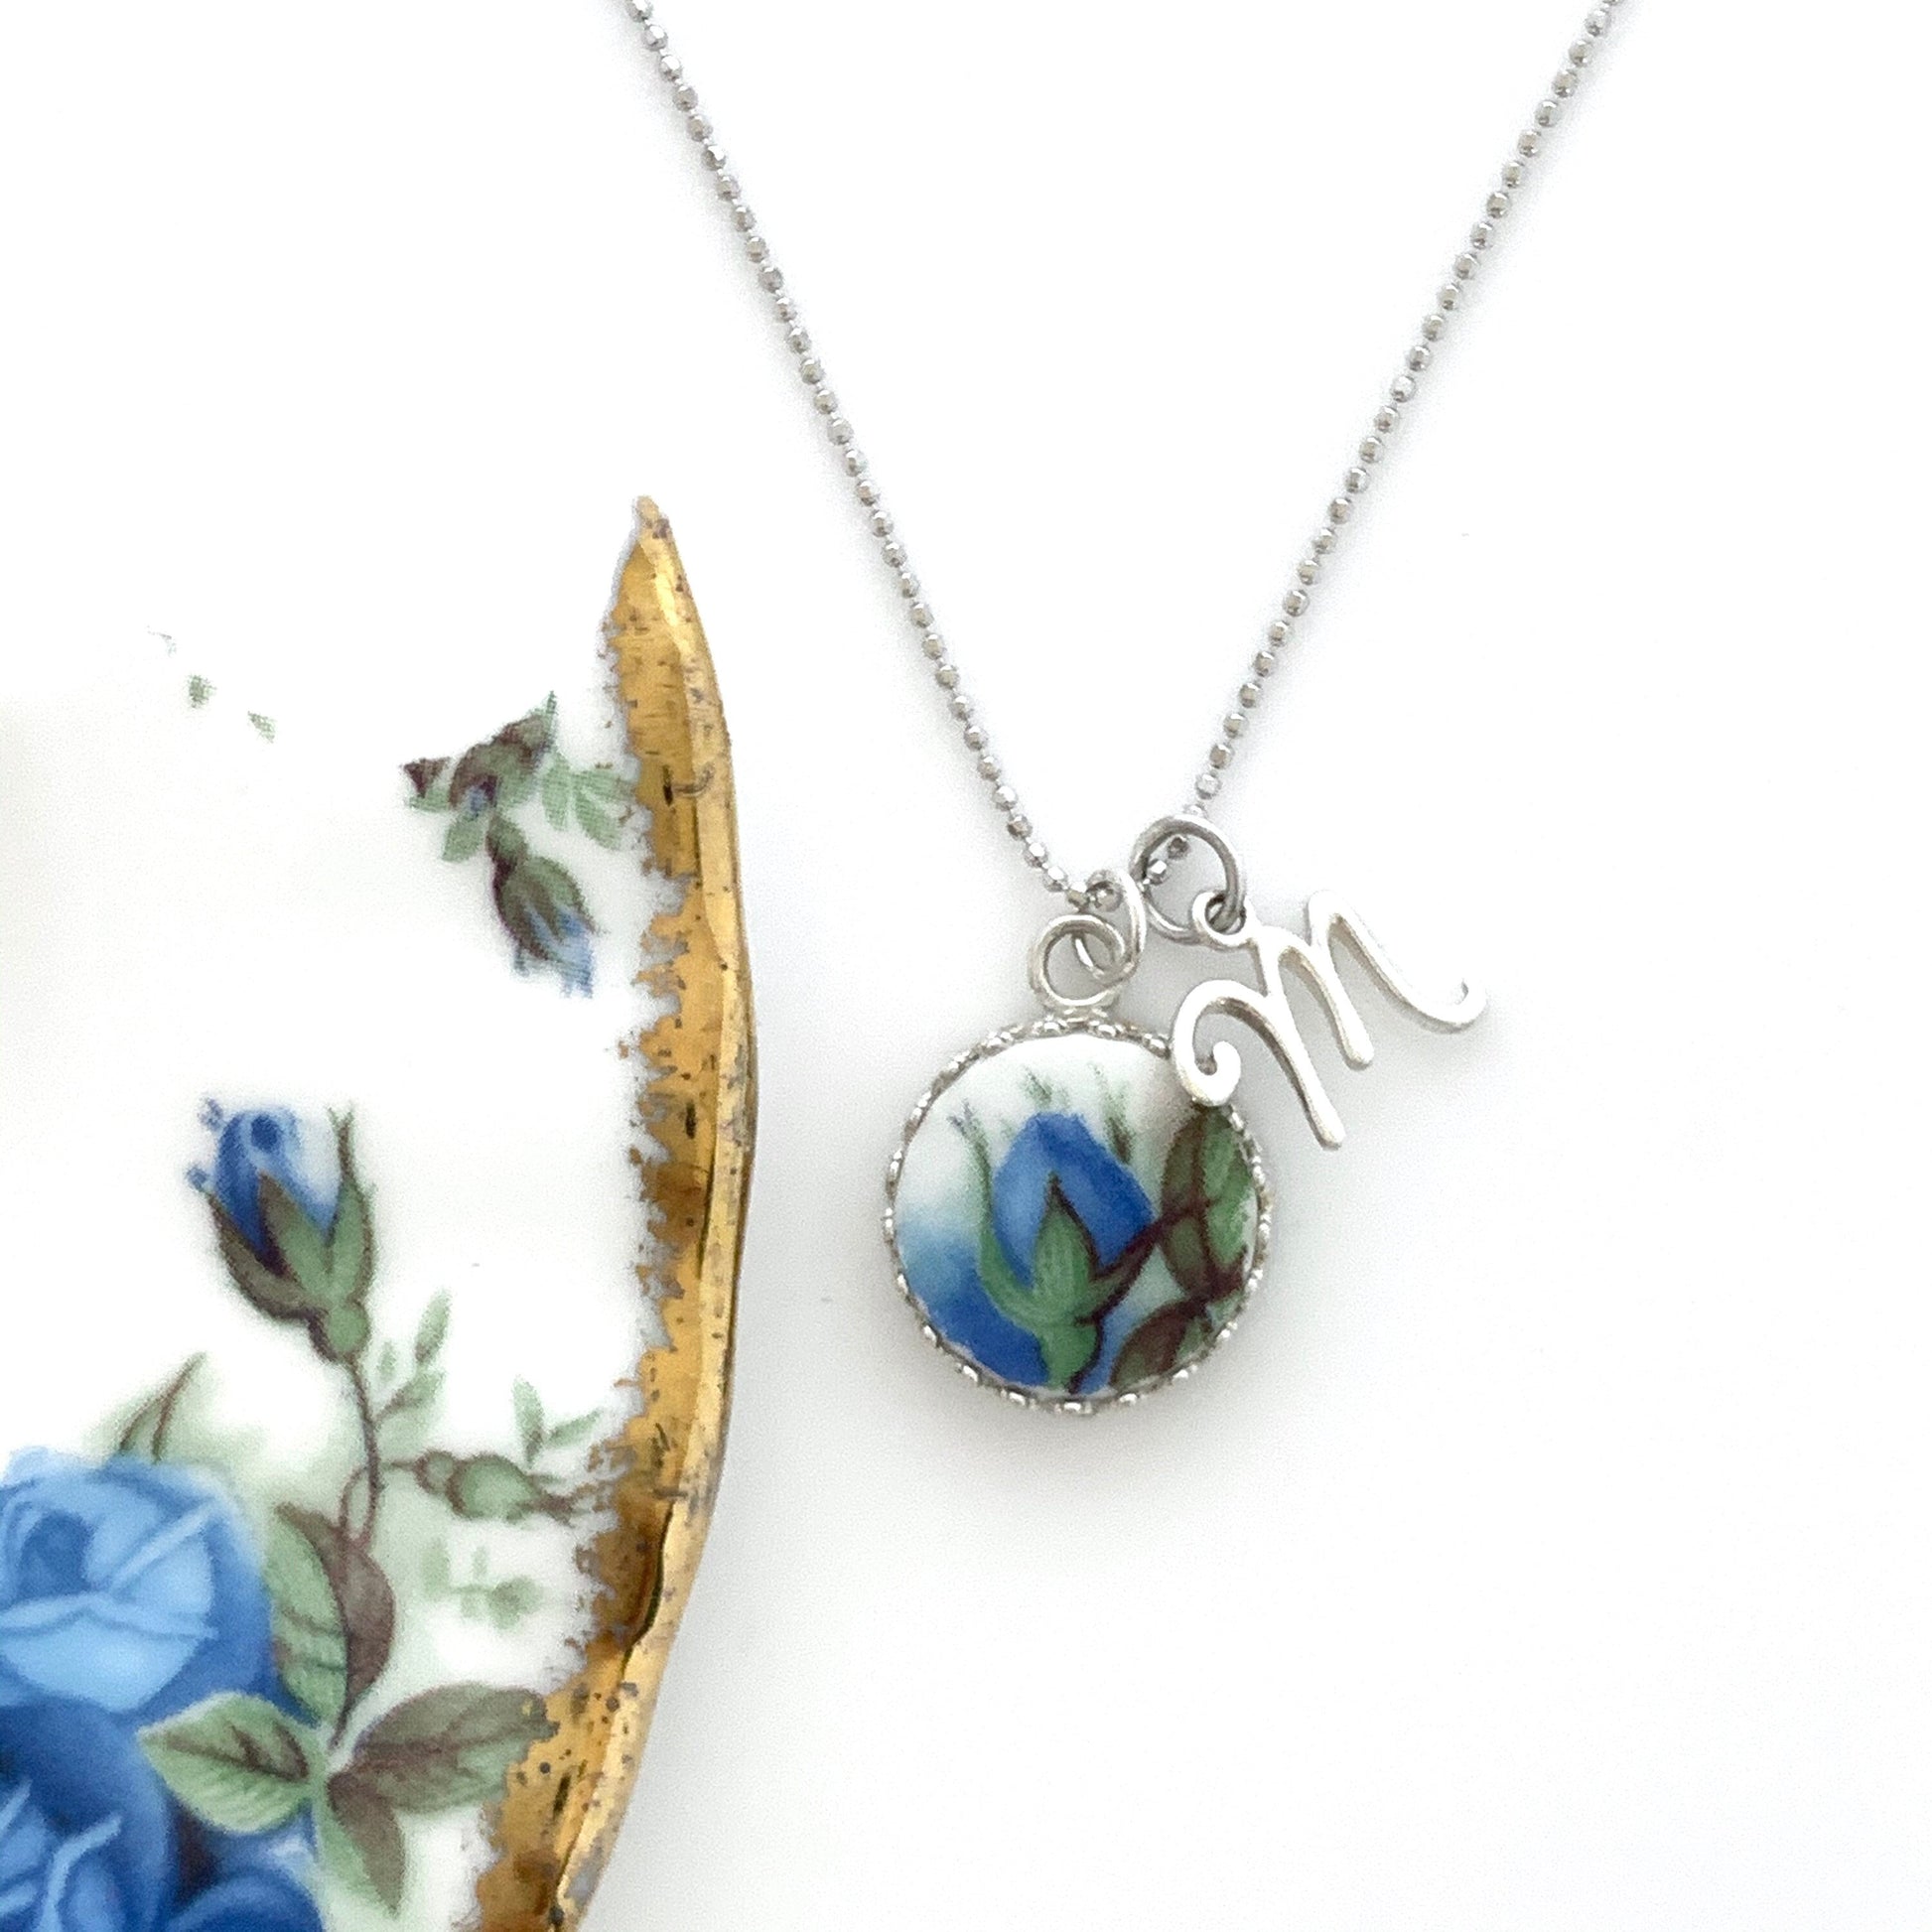 Royal Albert Moonlight Rose Initial Necklace, Name Necklace, Personalized Jewelry Gifts for Women, Gifts,